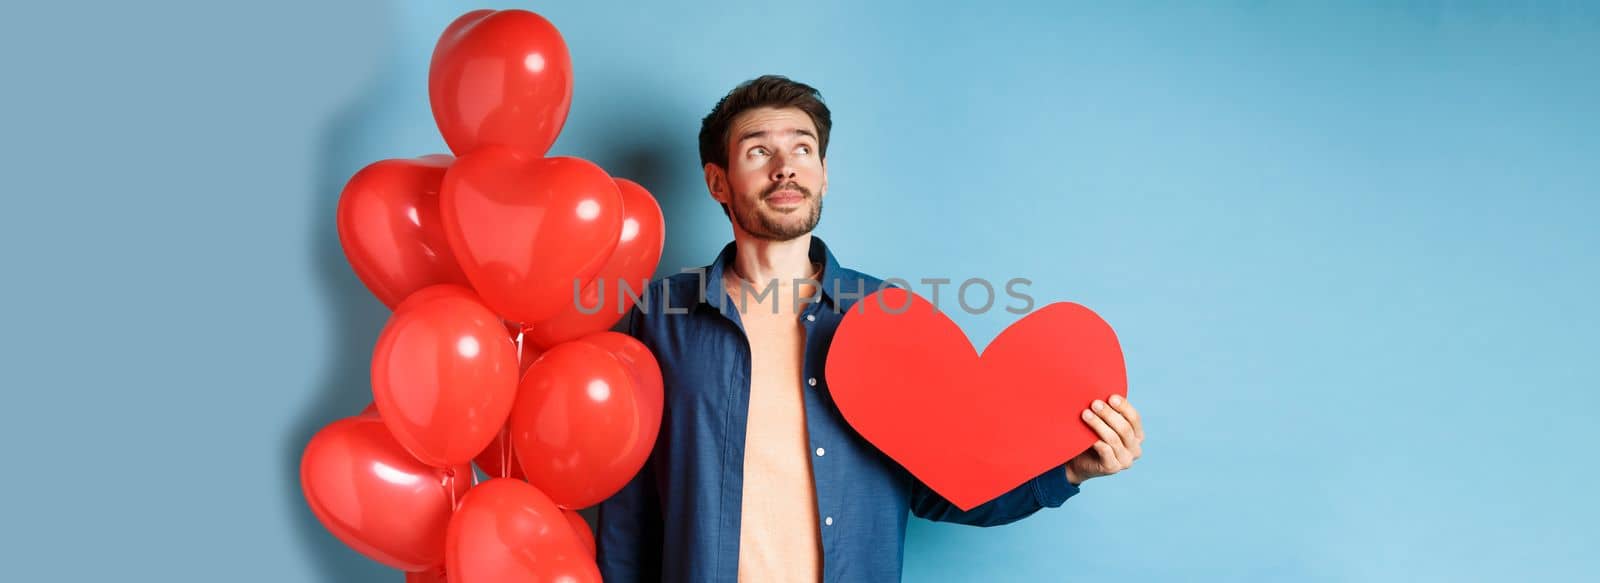 Valentines day and love concept. Man dreaming of soulmate, holding big red heart cutout and balloons, standing over blue background by Benzoix